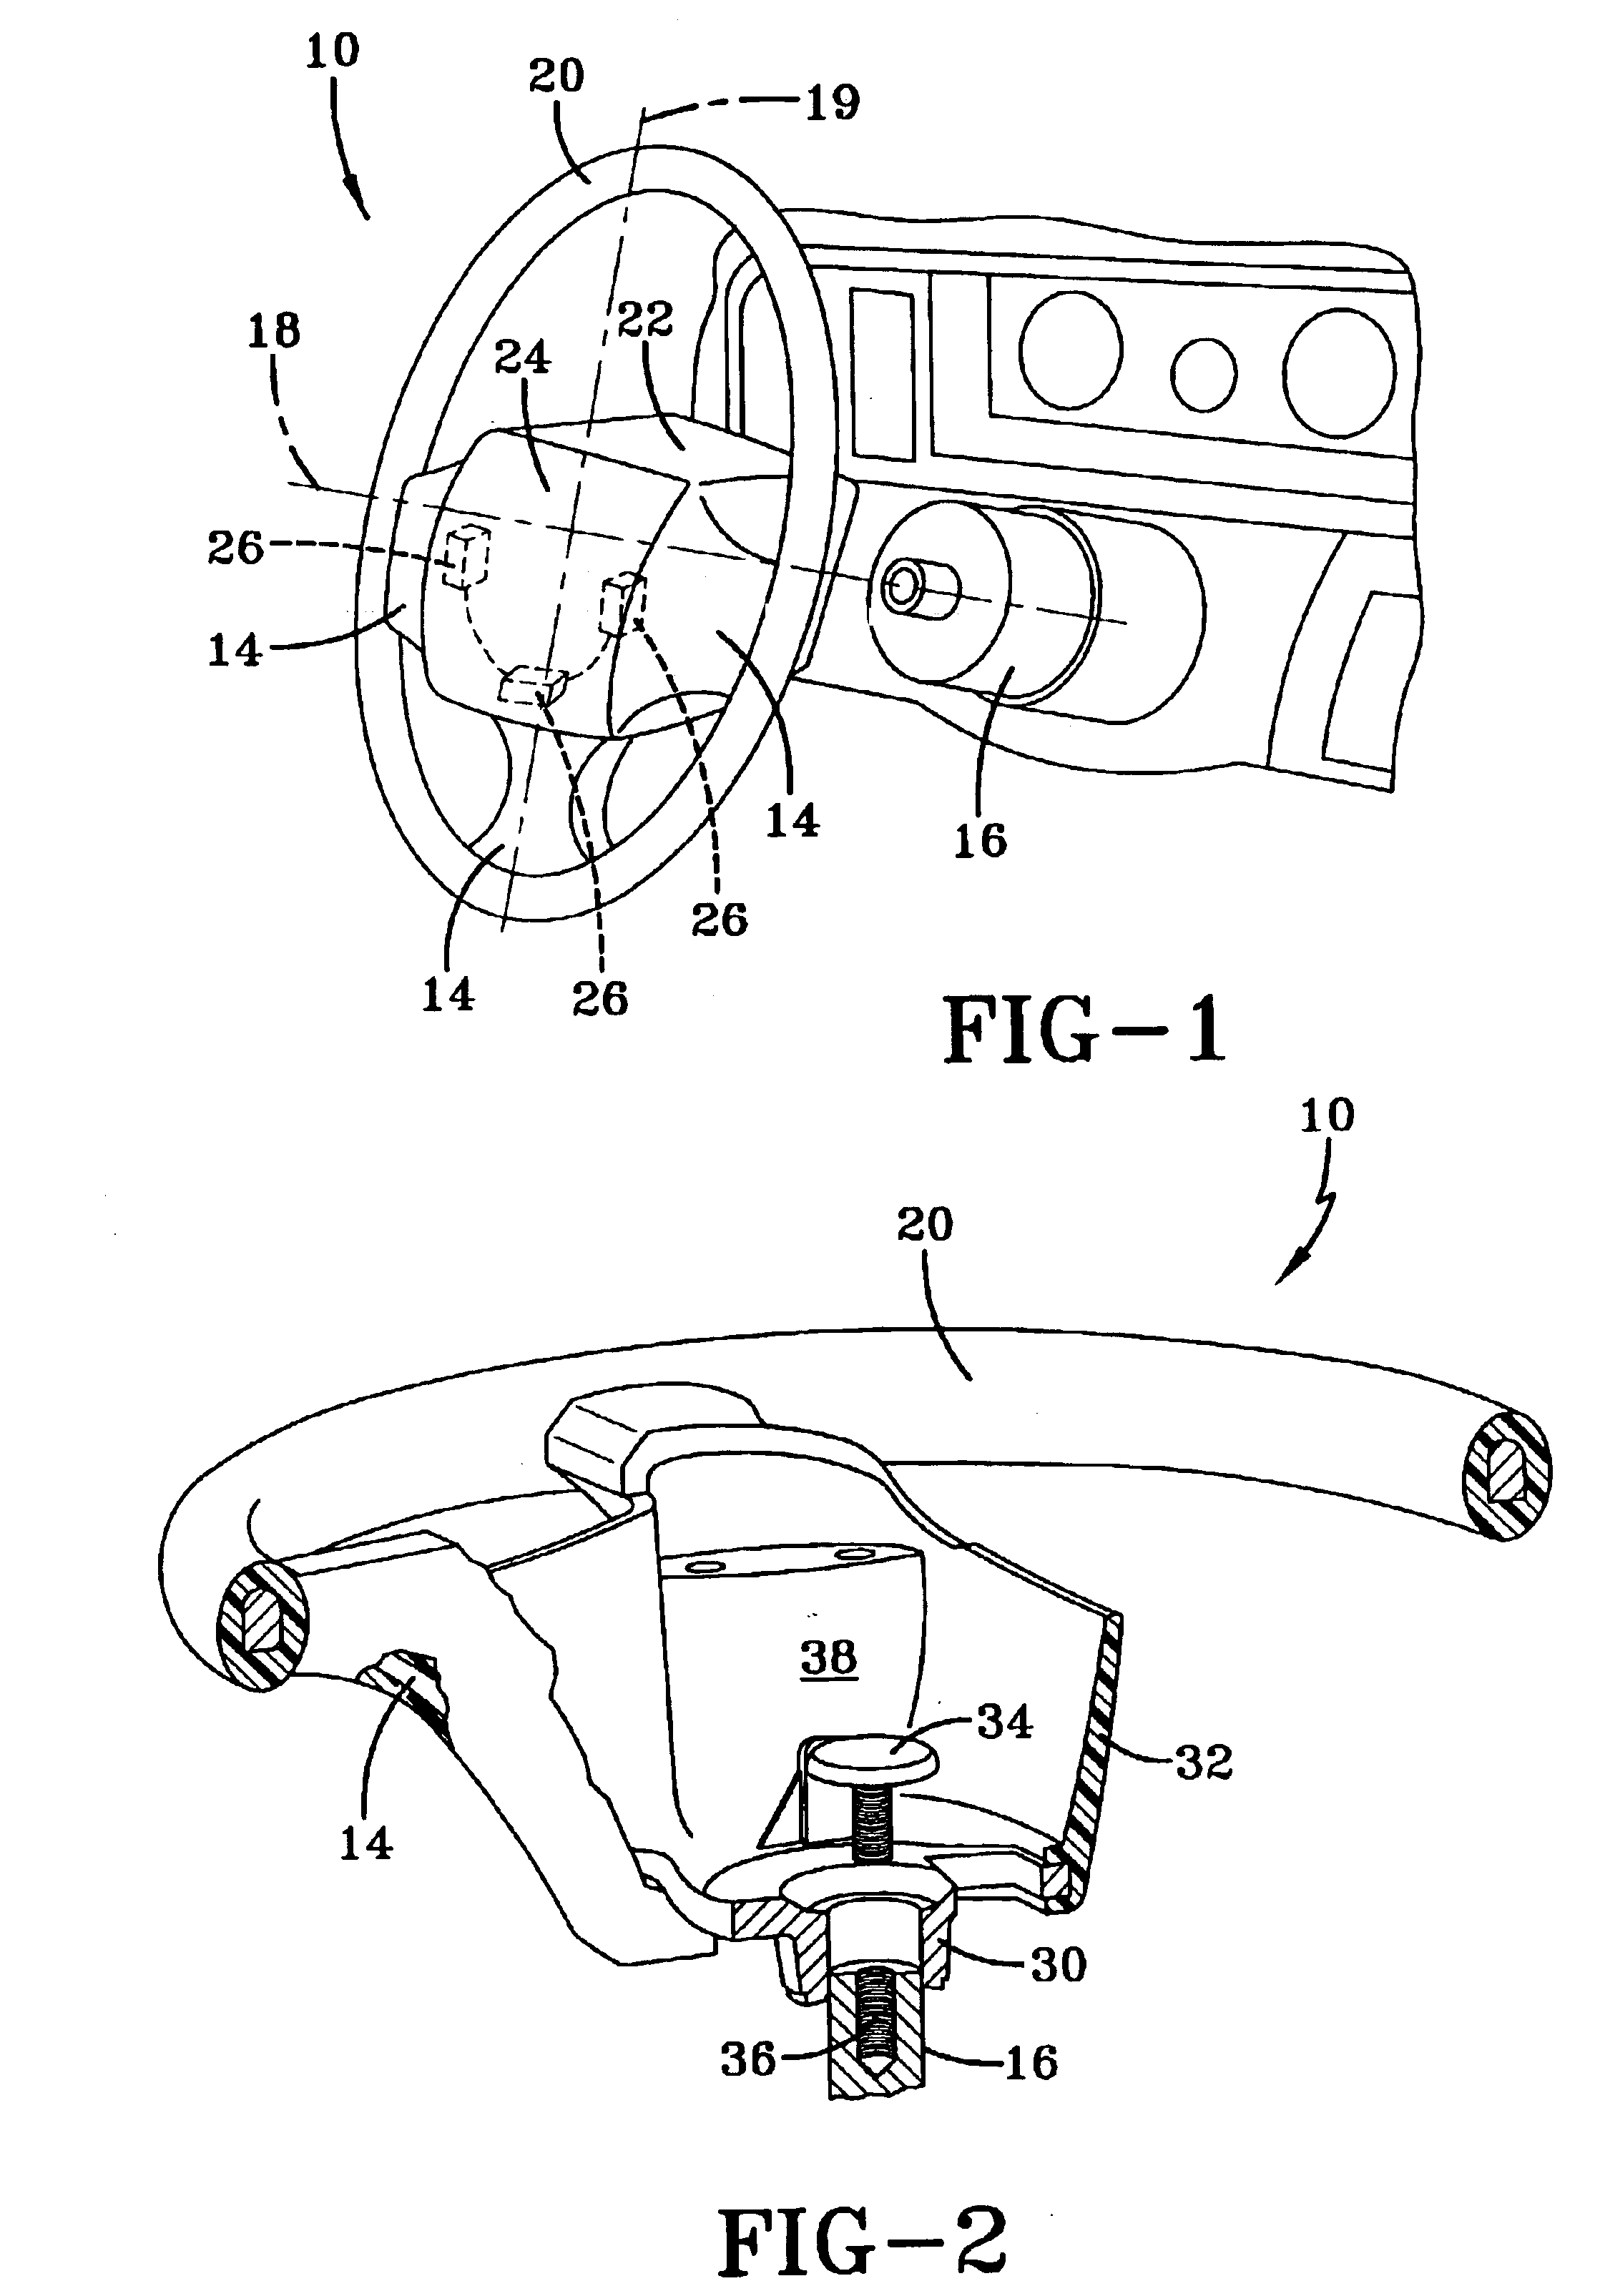 Switch assembly for an airbag module attachment